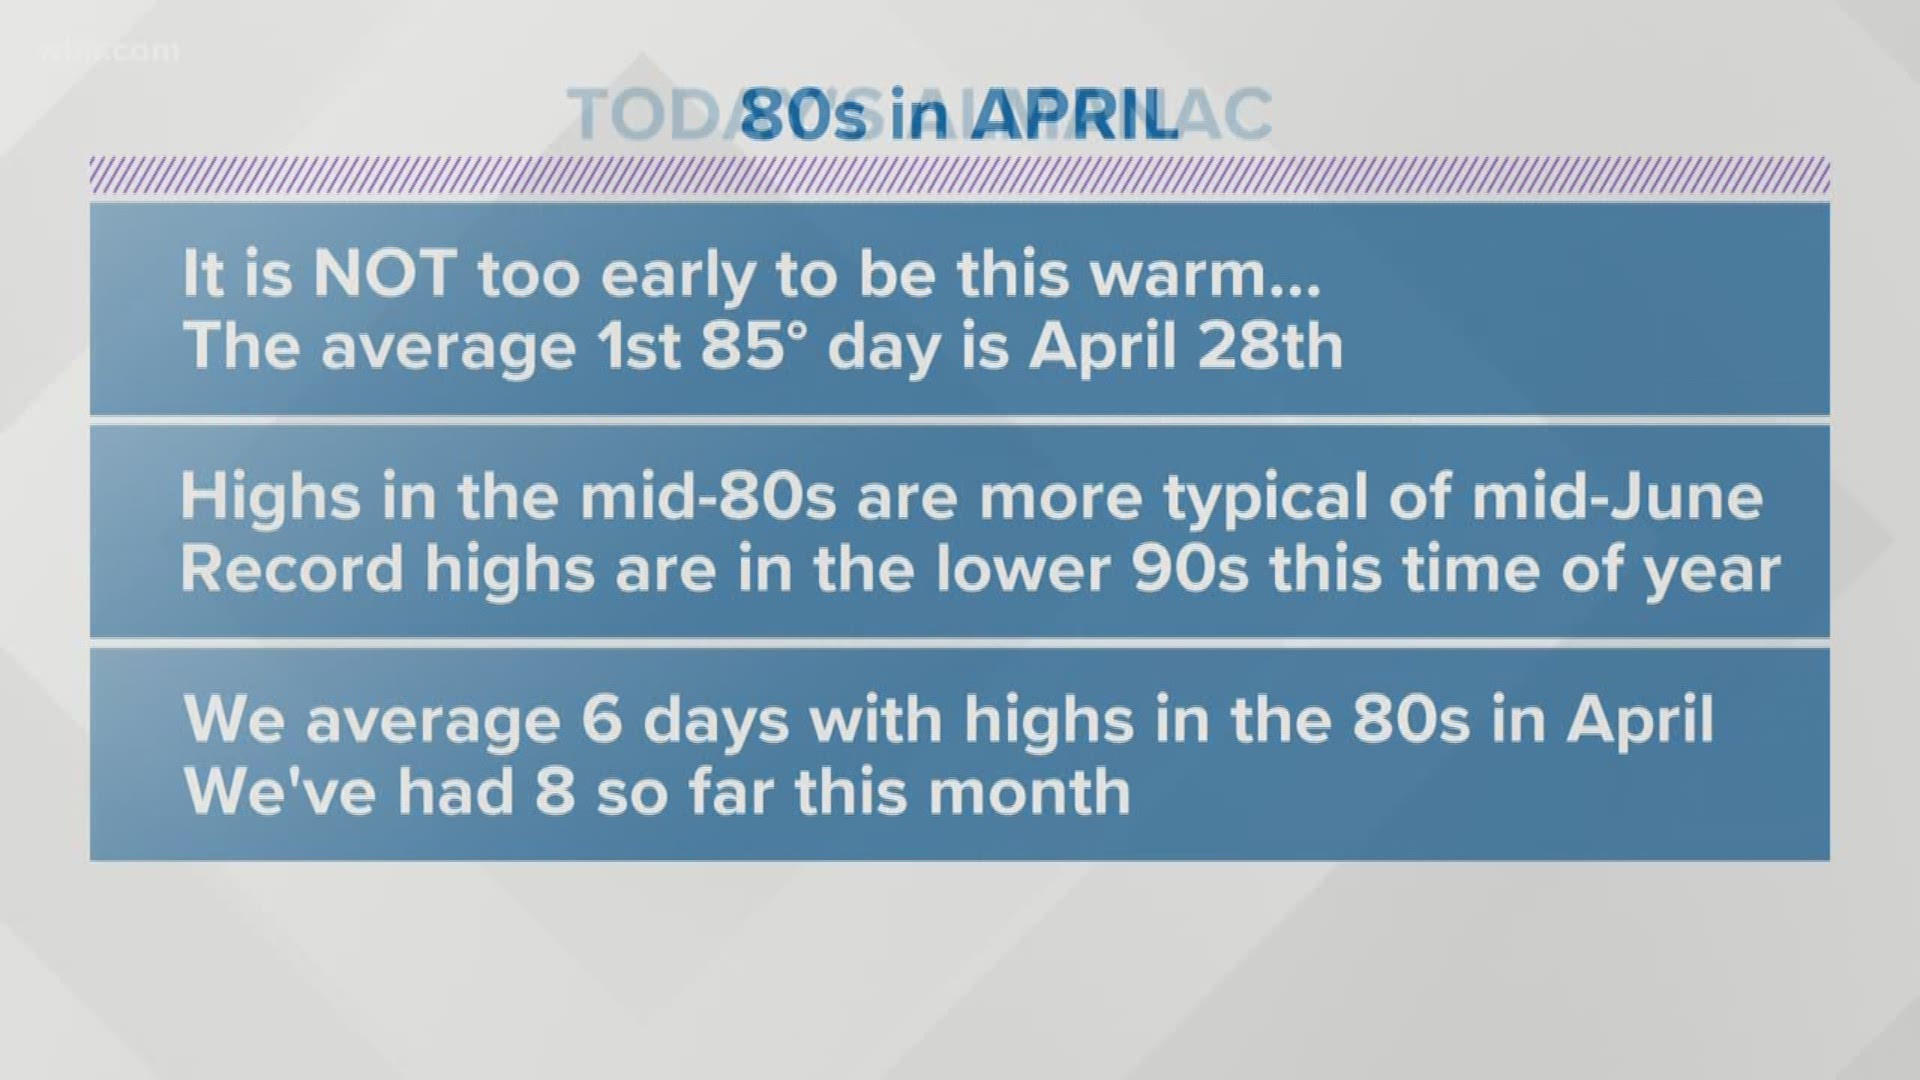 While consecutive days with temperatures in the mid-80s feels more like June, it's really not that unusual to warm up that much in April.